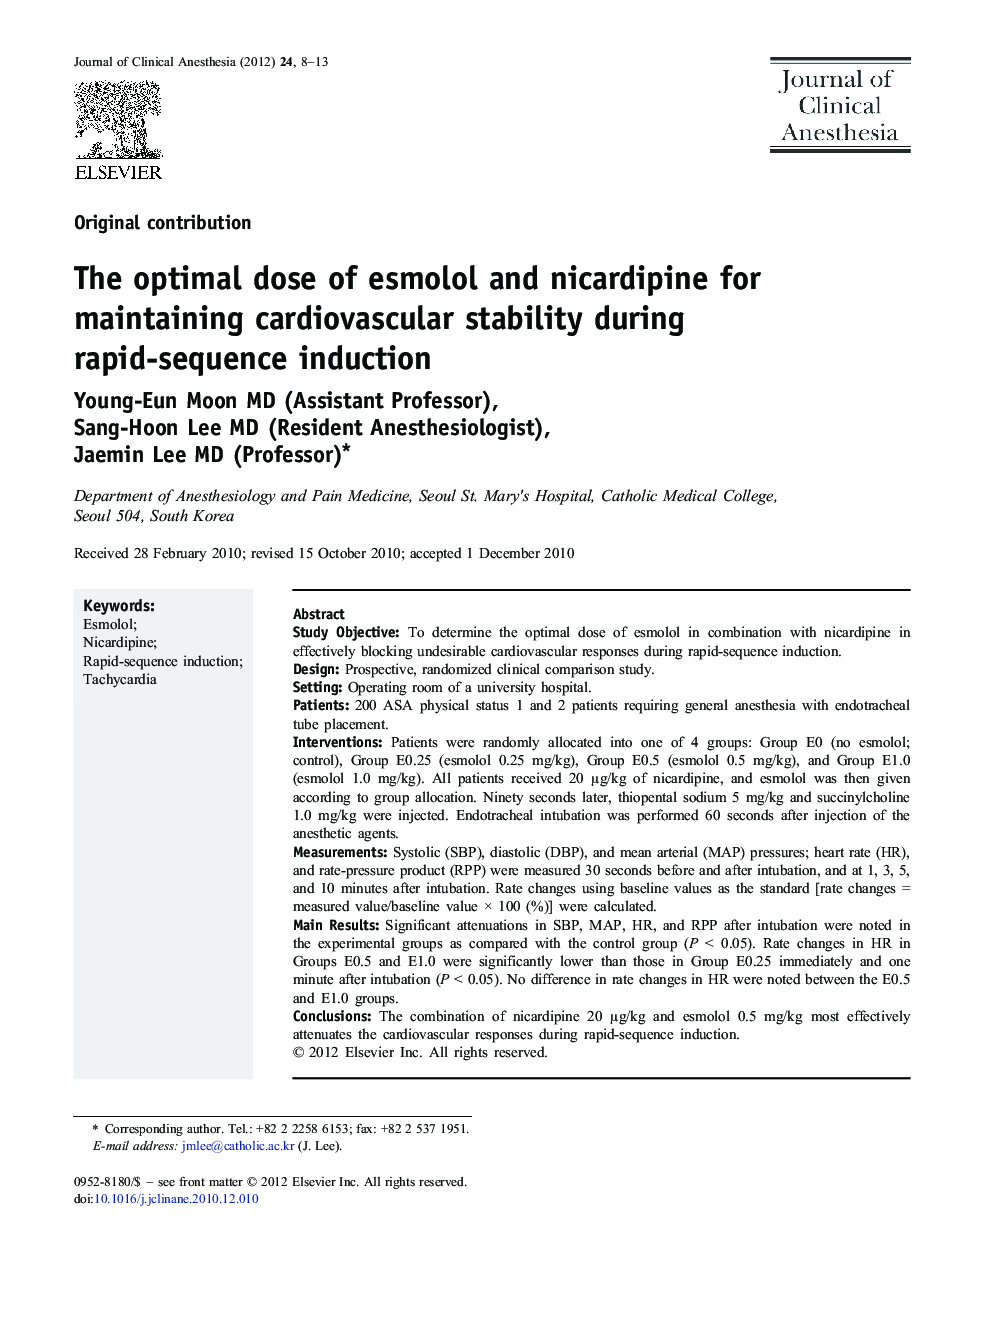 The optimal dose of esmolol and nicardipine for maintaining cardiovascular stability during rapid-sequence induction